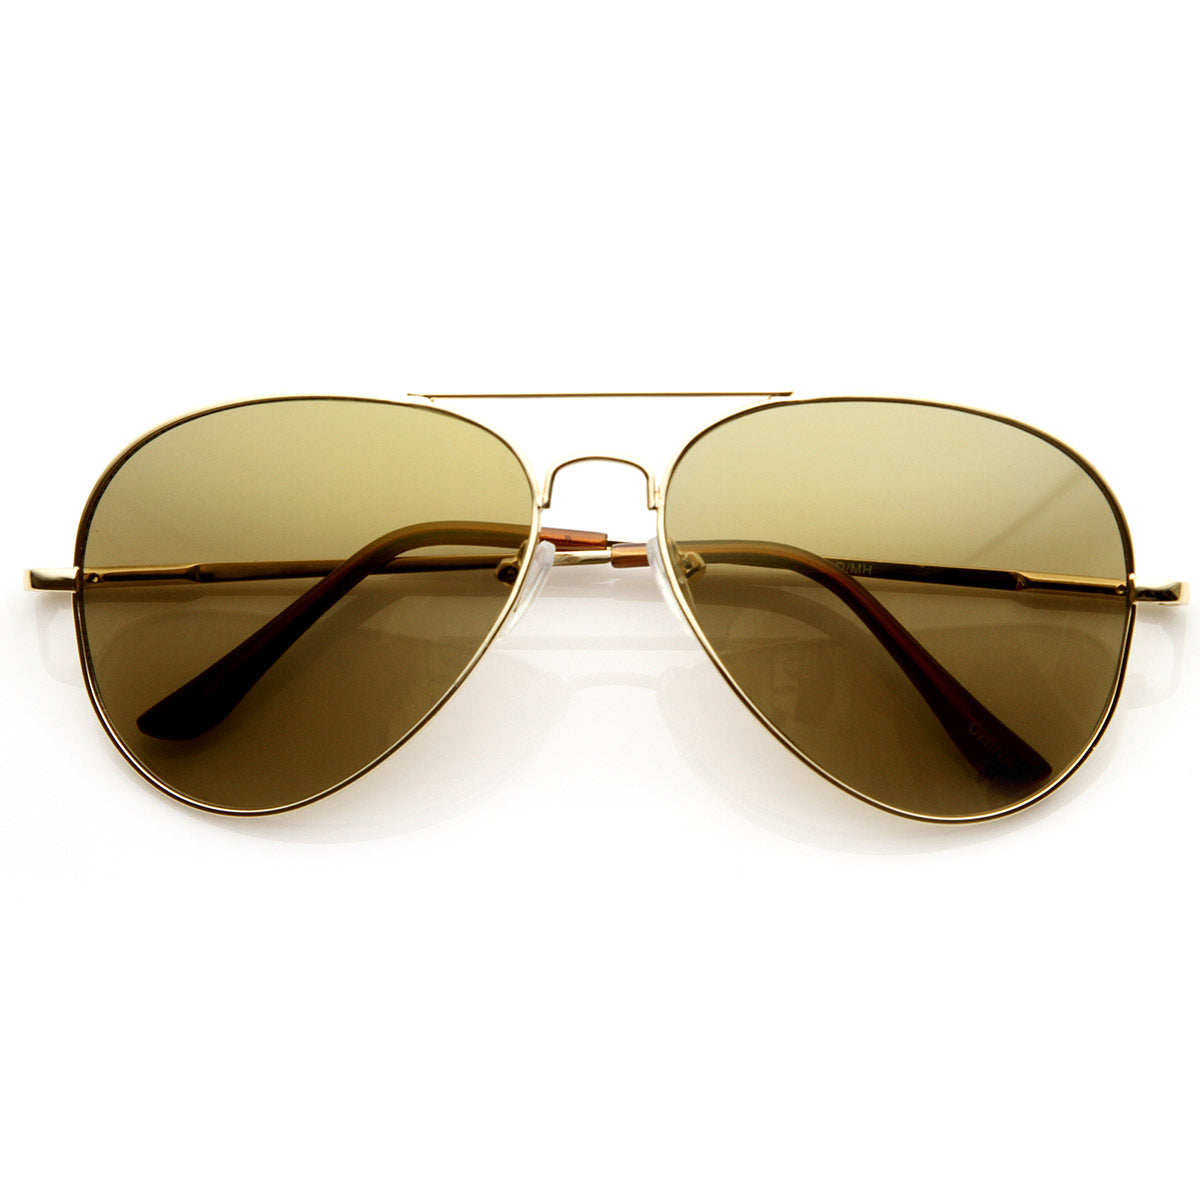 Ray-Ban RB3025 11285 Sunglasses Gold Frame Brown India | Ubuy